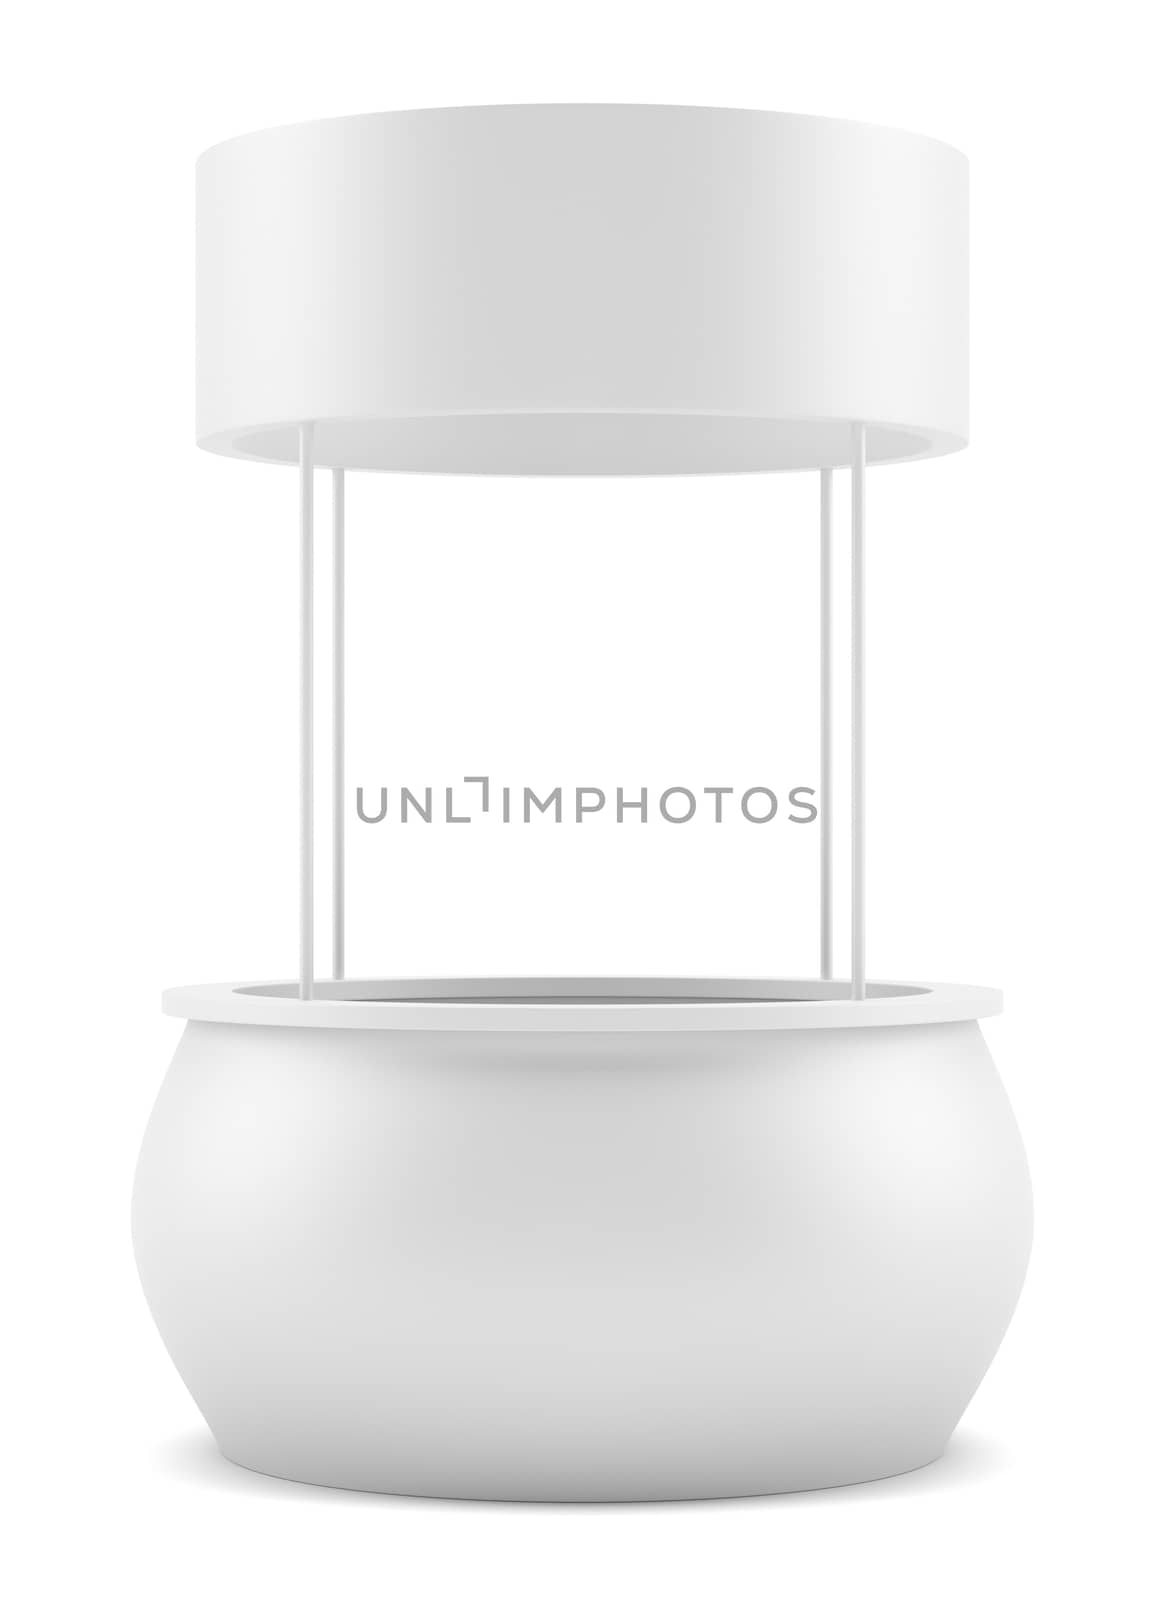 White round POS POI advertising retail stand. Isolated on white. 3D illustration. Template